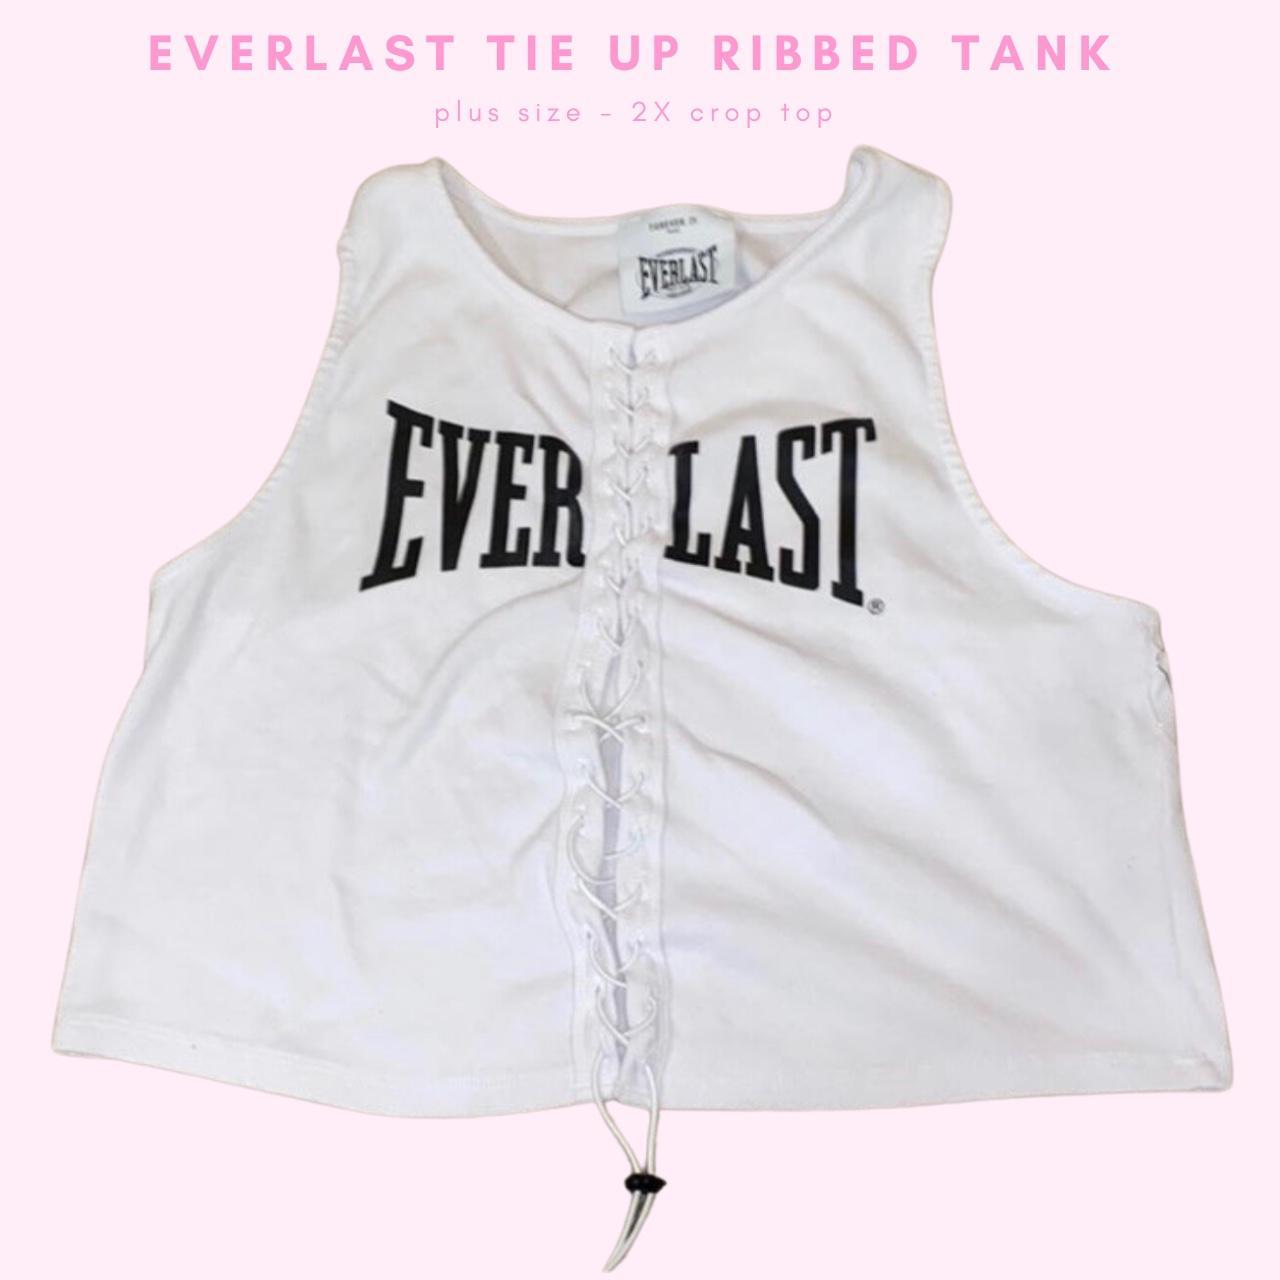 Everlast by Forever 21 Tie-Up Ribbed Crop Top Size - Depop